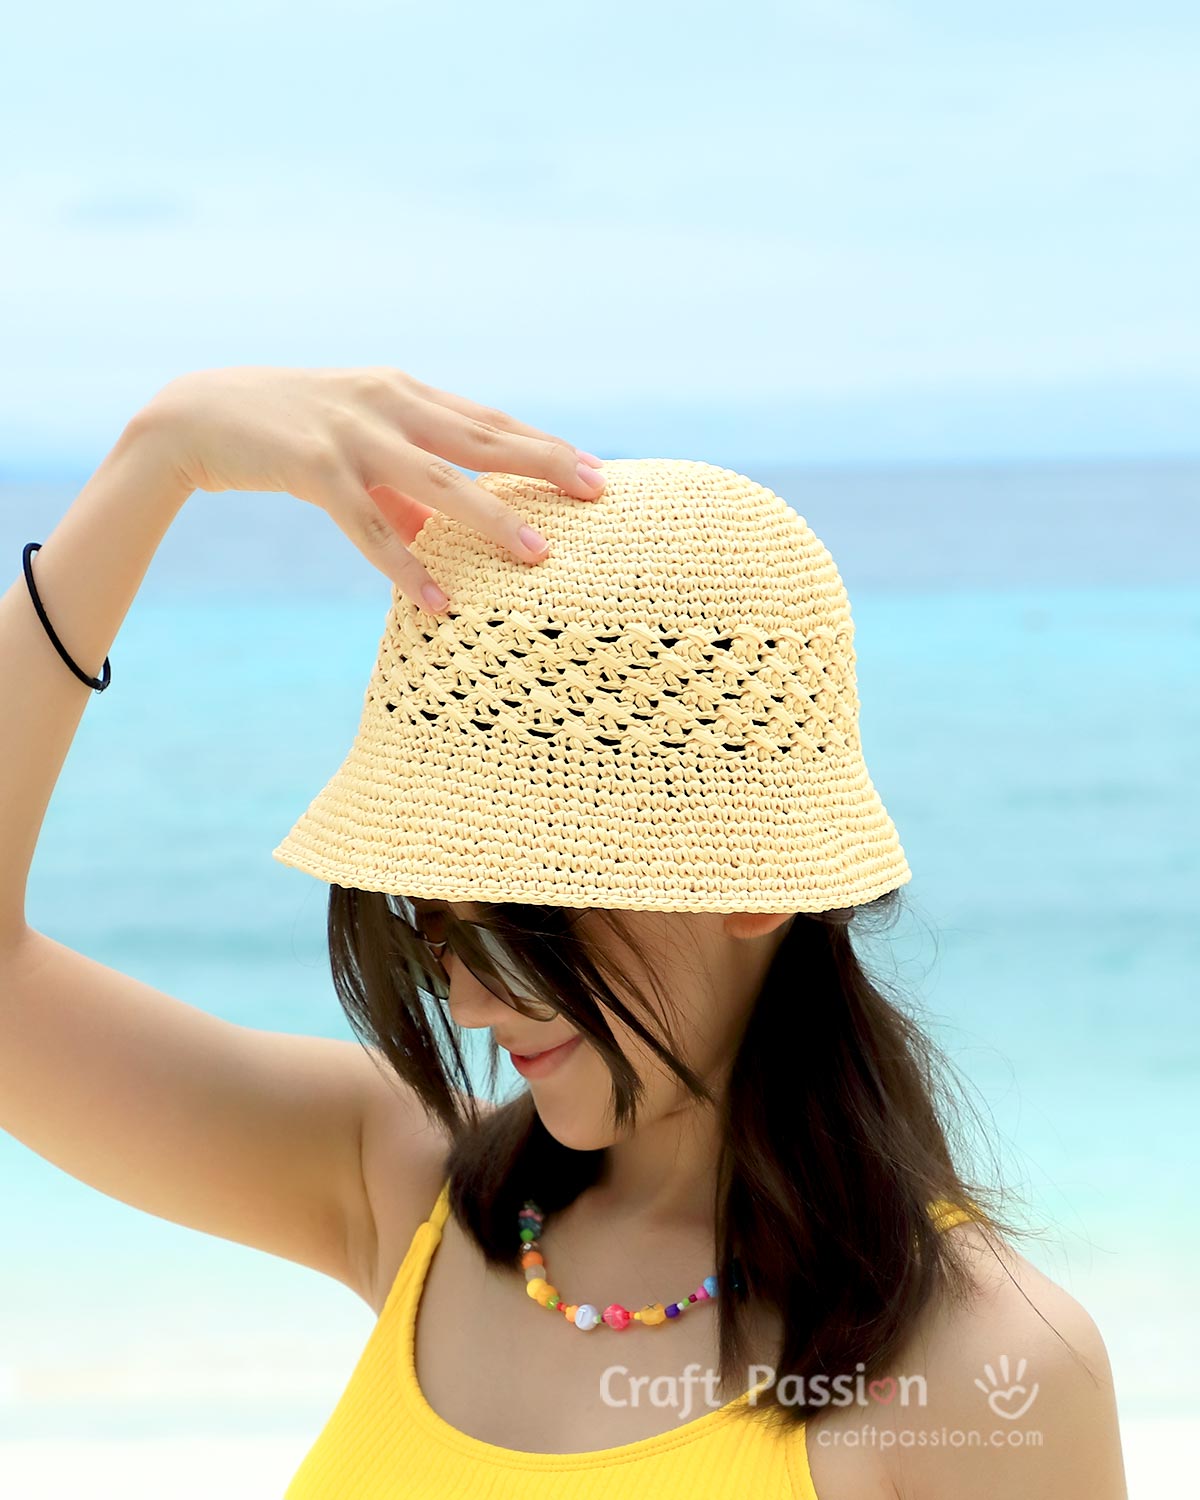 You can make this beautiful crochet bucket hat with a unique cable stitch pattern in 1 day. Free pattern includes detailed how-to-crochet with step-by-step photos.